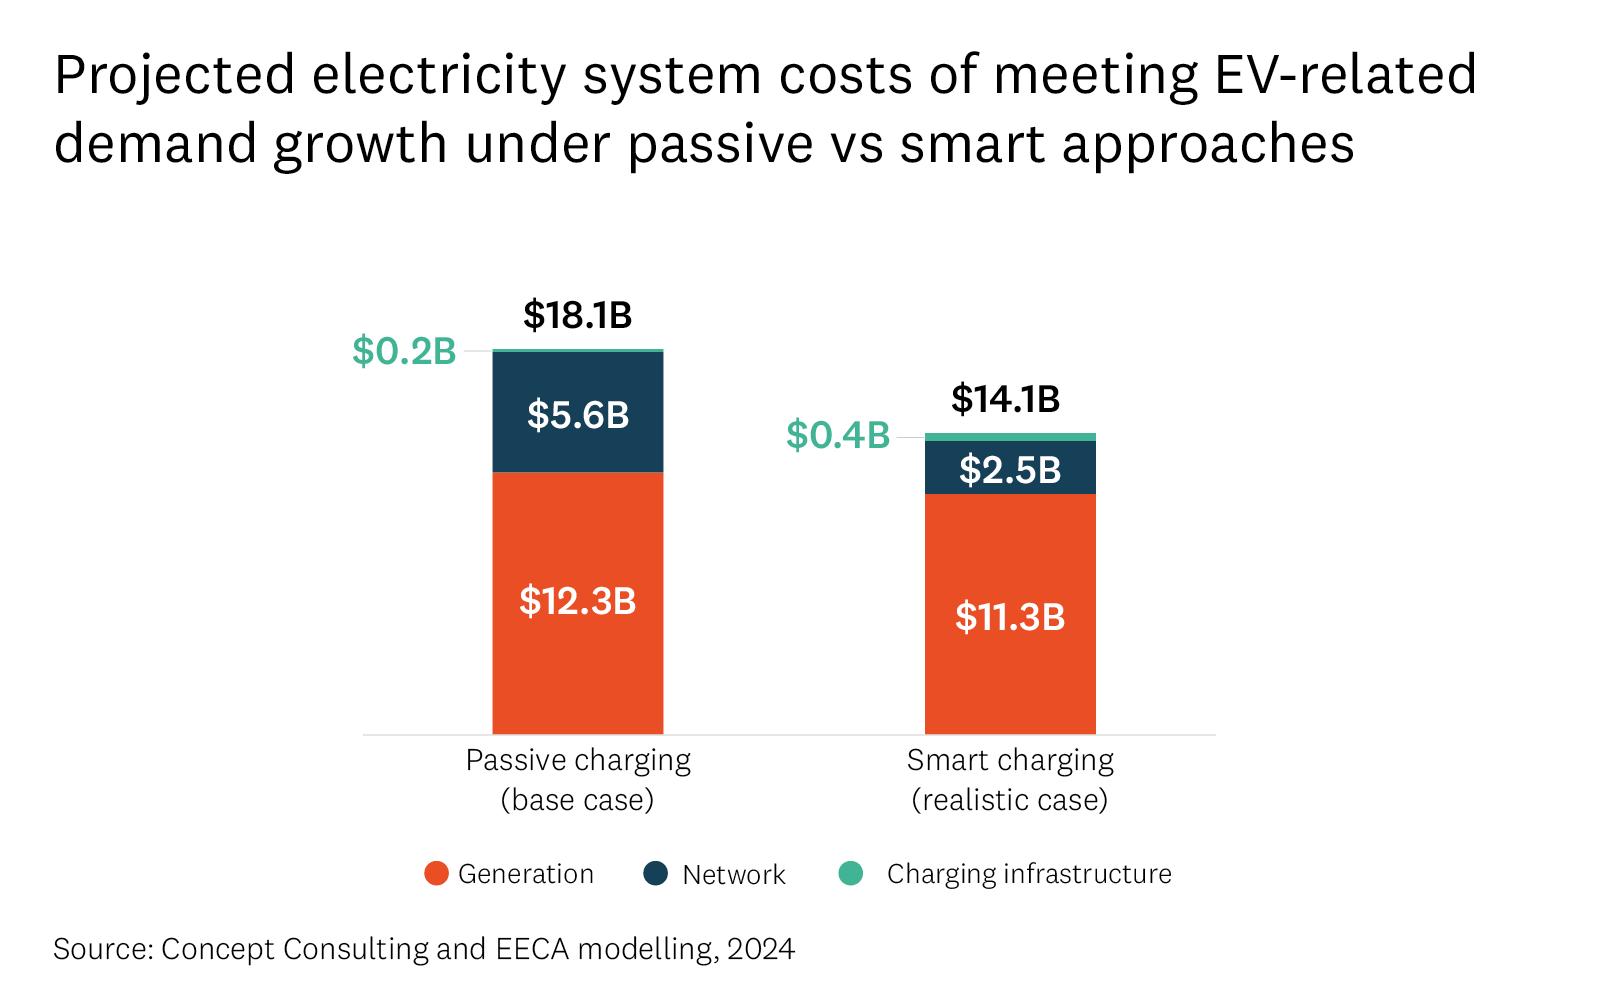 Bar graph shows the projected electricity system costs of meeting EV-related demand growth under passive vs smart charging approaches. 